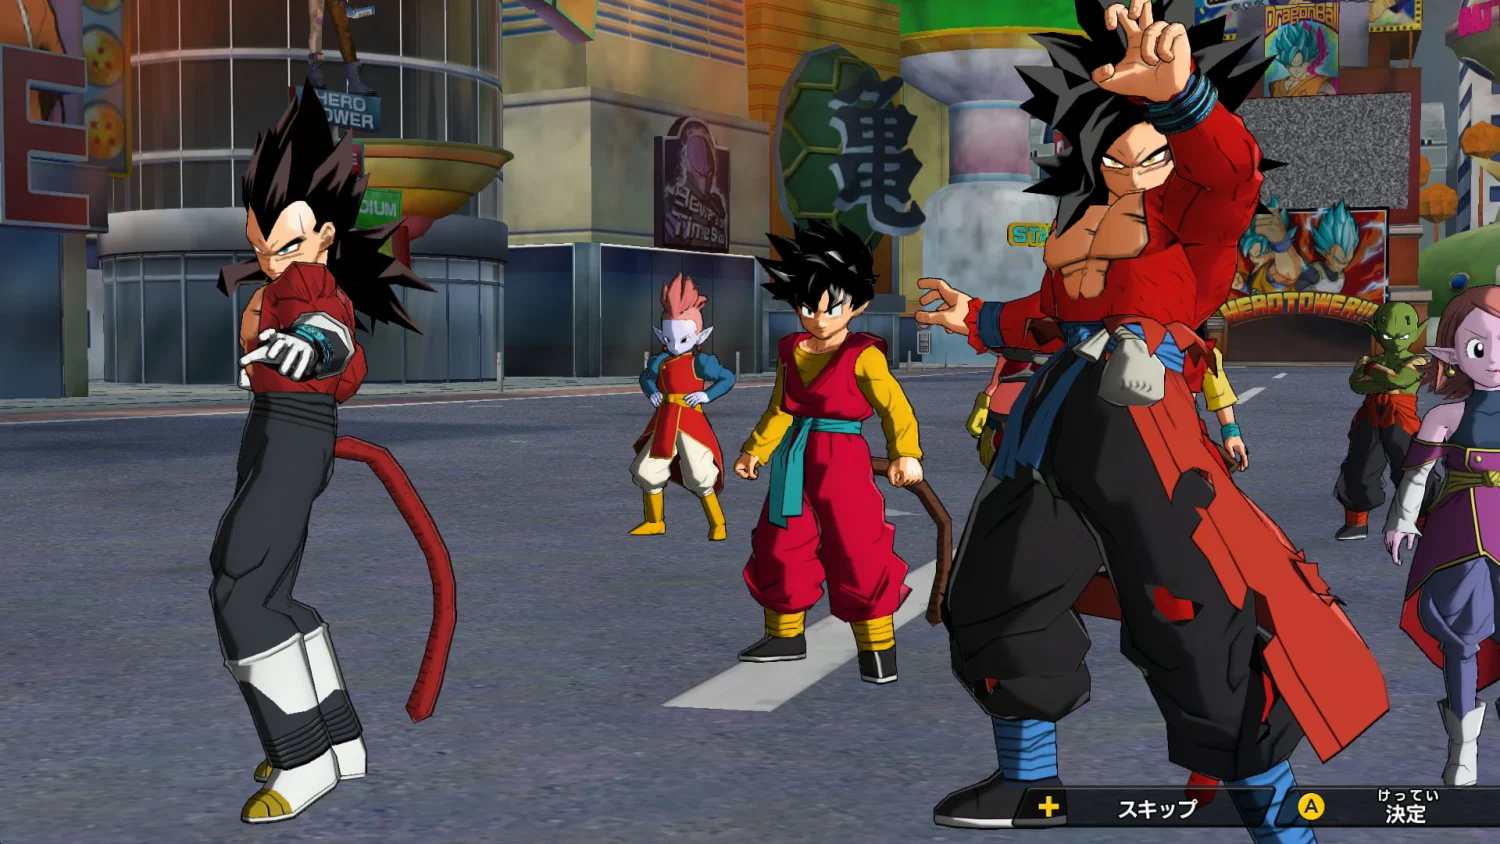 SUPER DRAGON BALL HEROES WORLD MISSION for Nintendo Switch